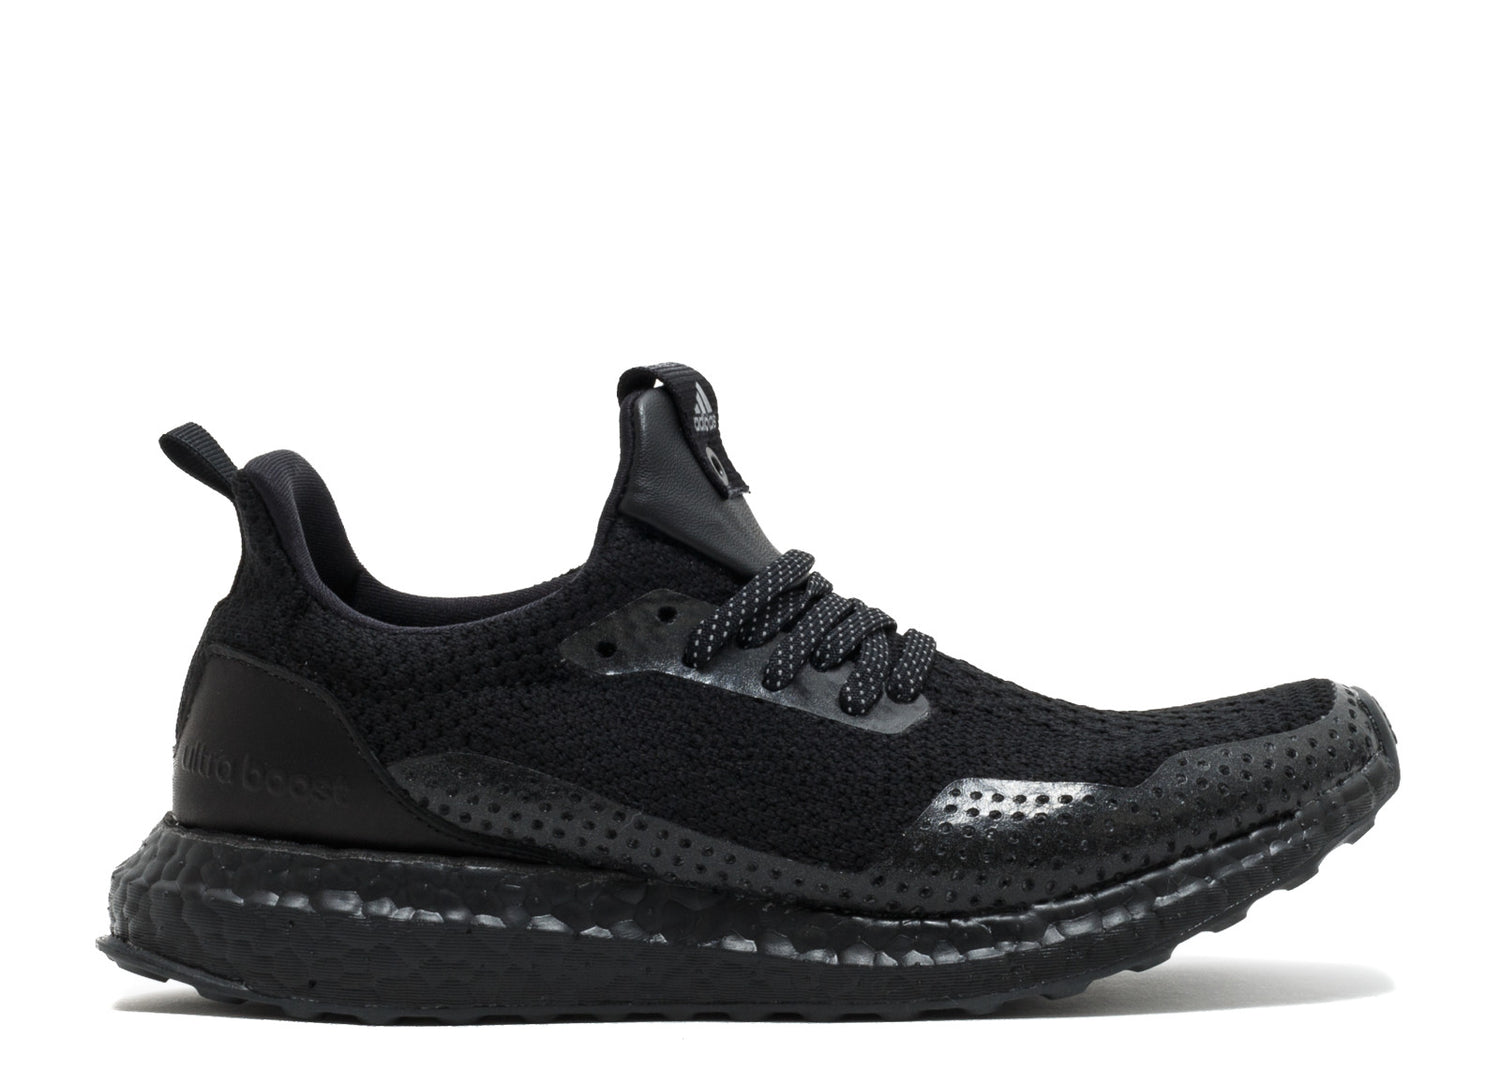 Adidas Ultraboost Uncaged "Haven"